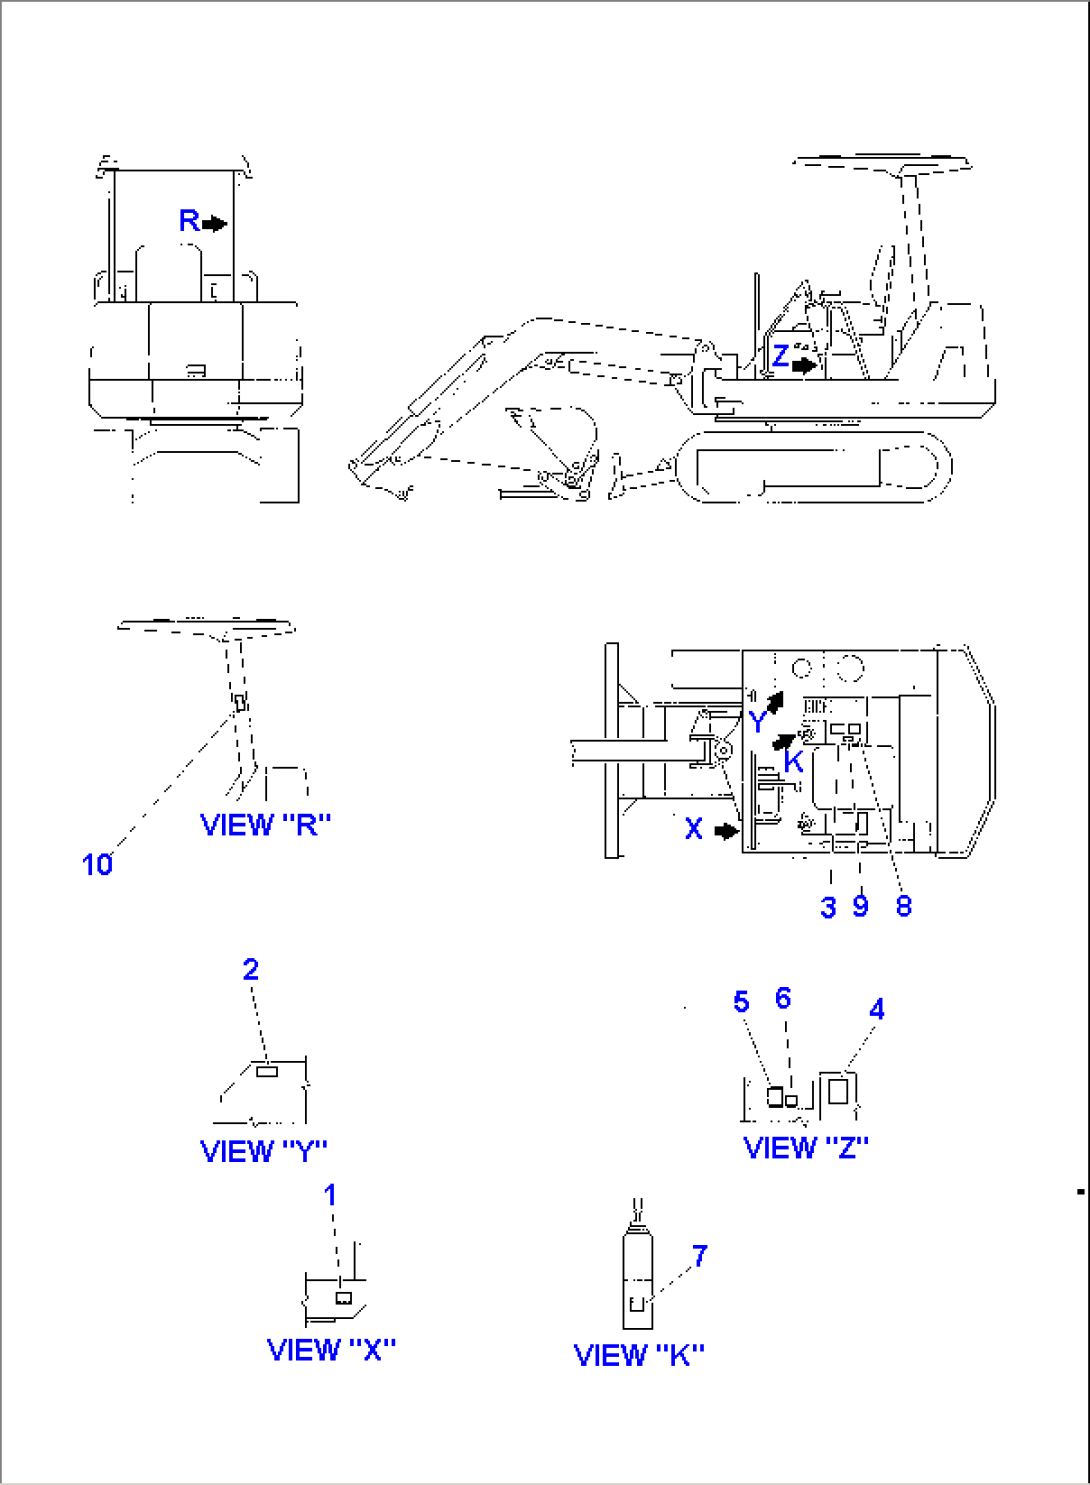 MARKS AND PLATES (FOR CANOPY): 2nd PART (EUROPE)